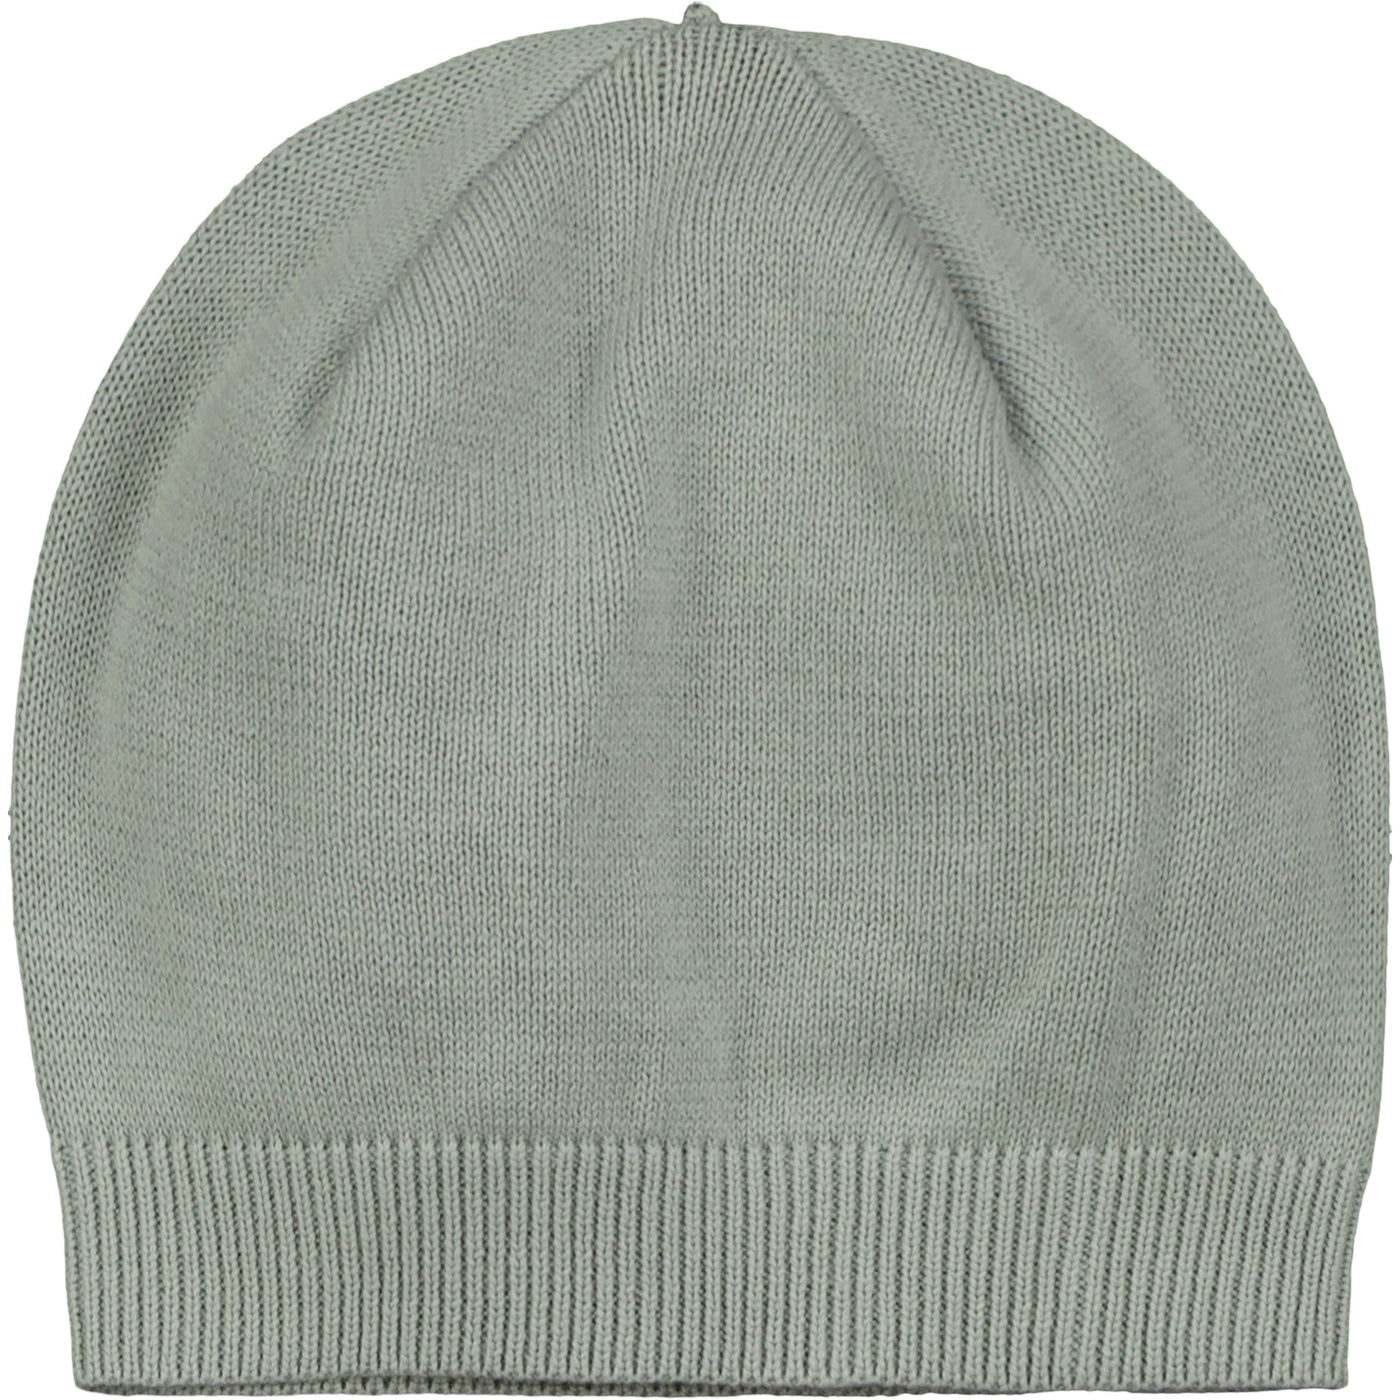 Easton Grey Knit Boys All-in-One